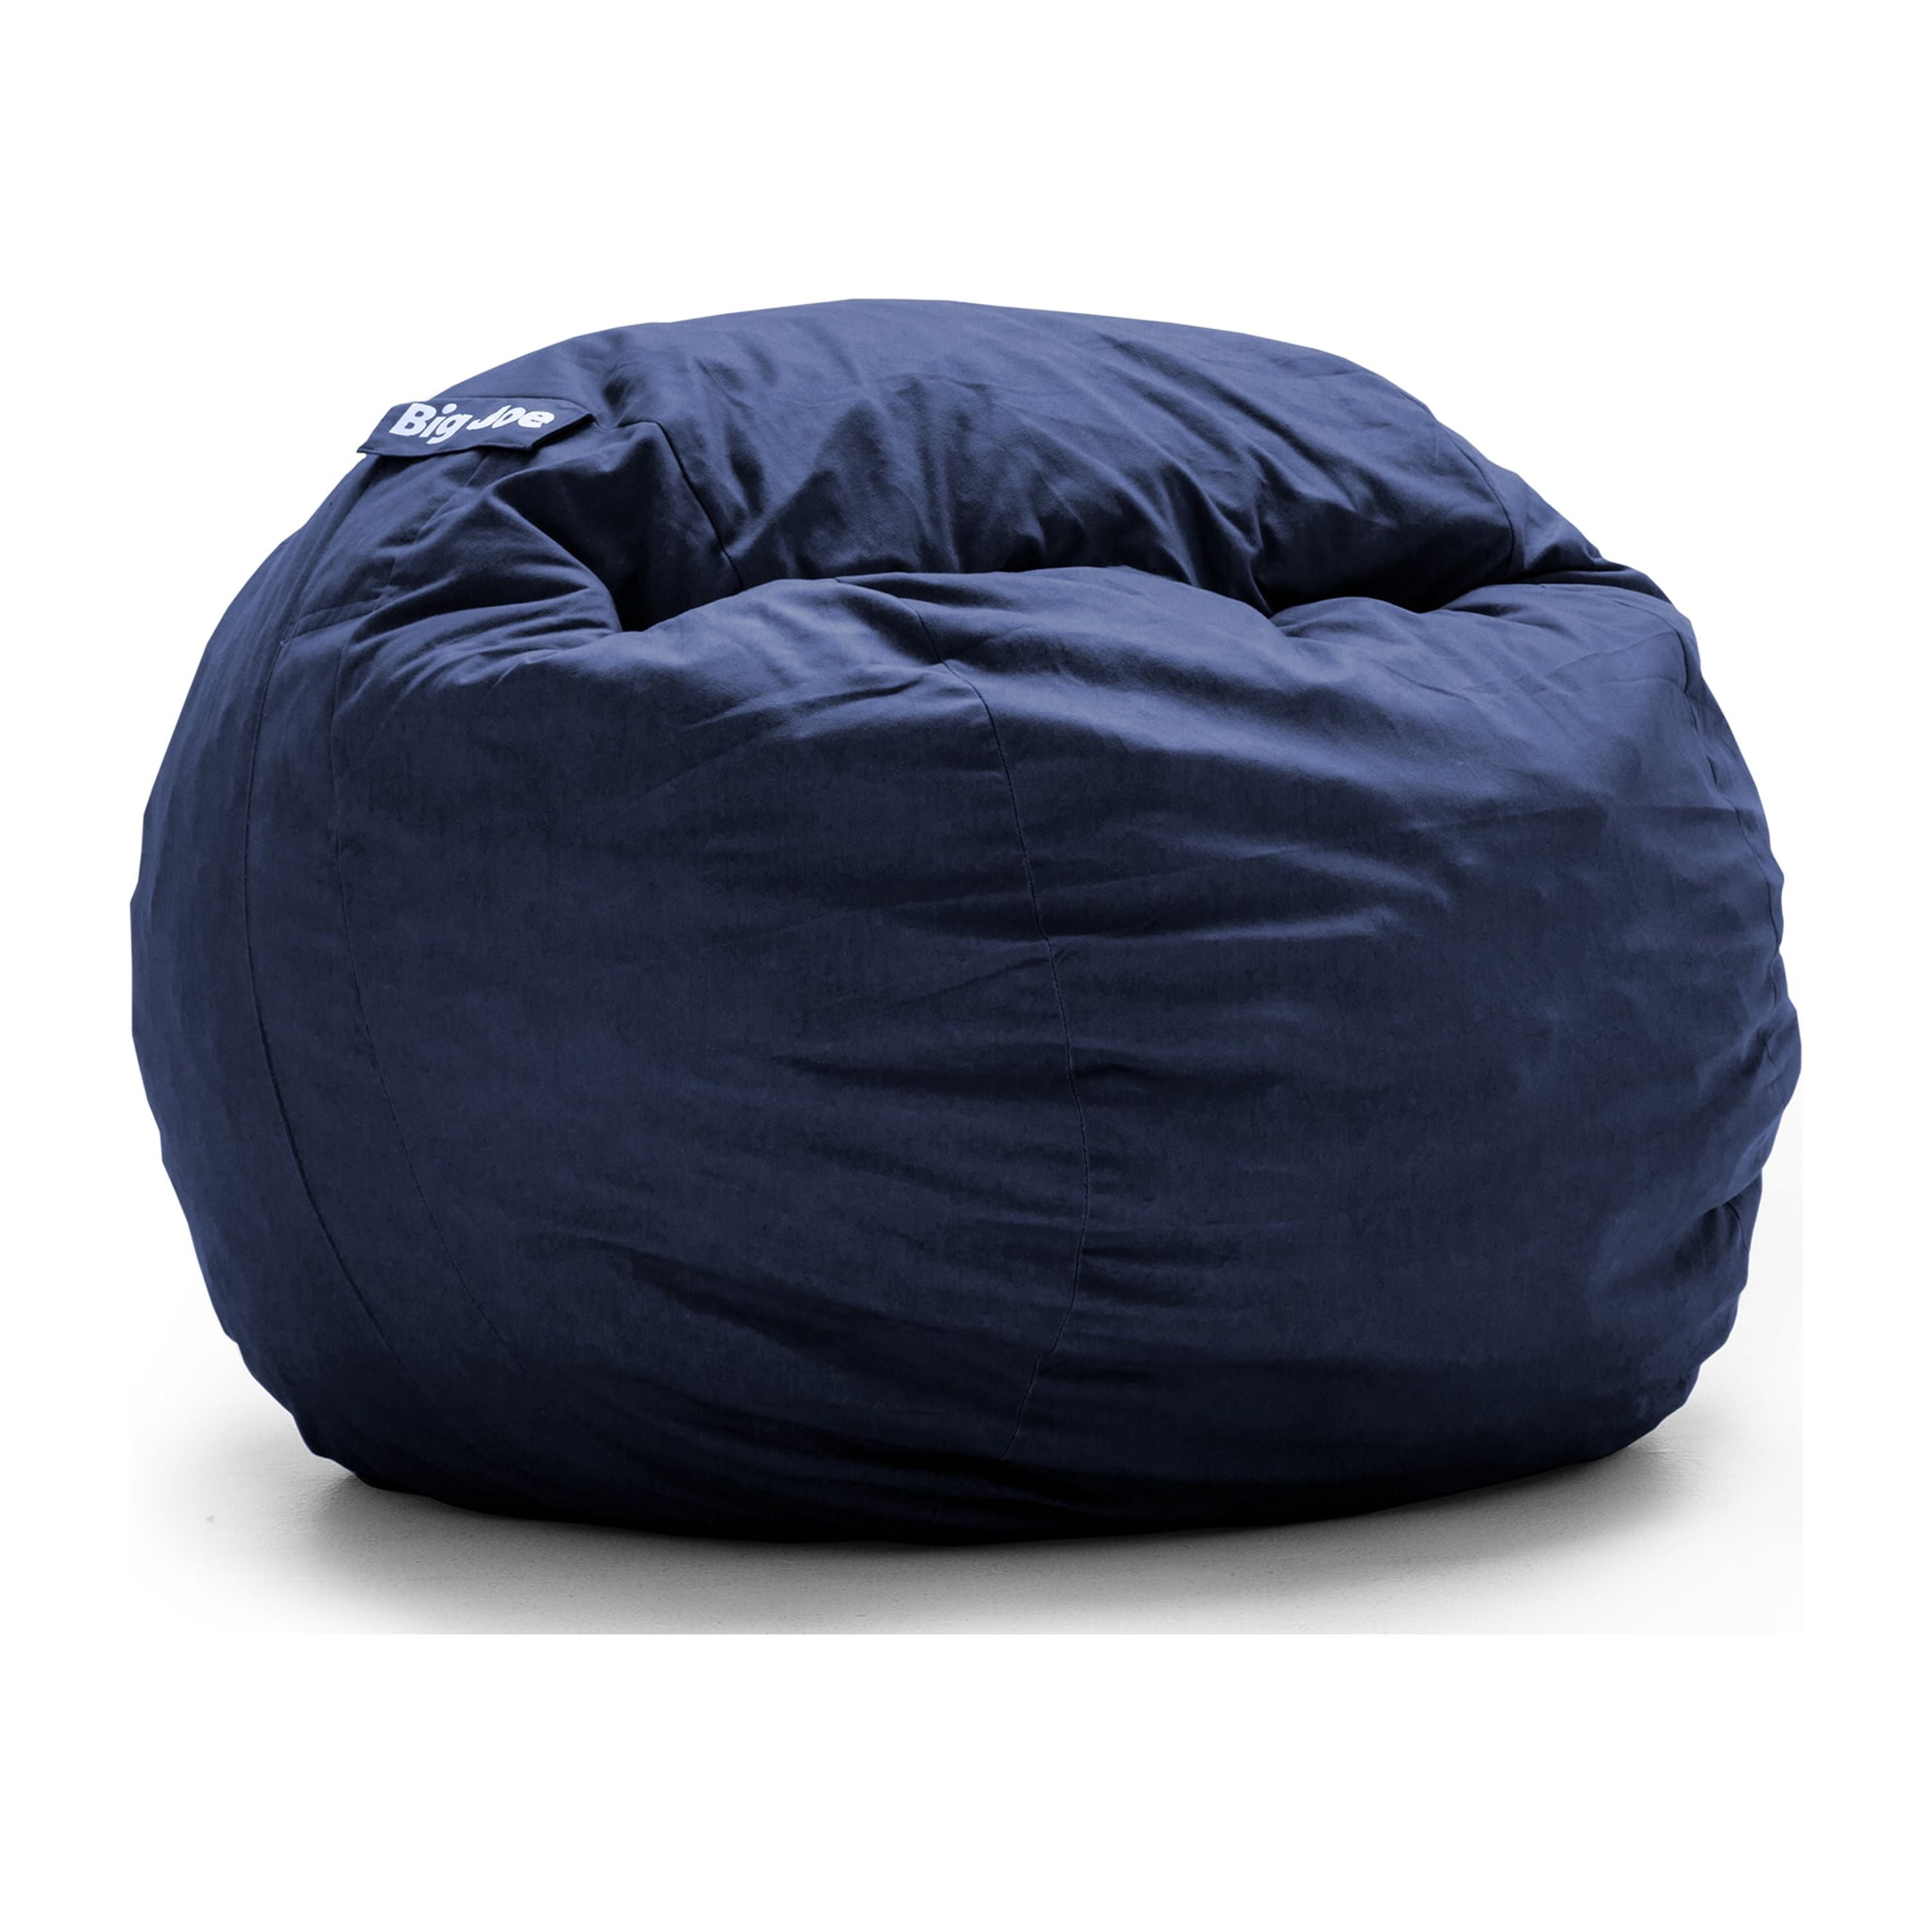 Codi Bean Bag Chair with Filler Included, 3ft - Comfy Beanbag Chairs,  Memory Foam Added - Machine Washable and Soft Mink Bonded Cover - Blue, 3 FT